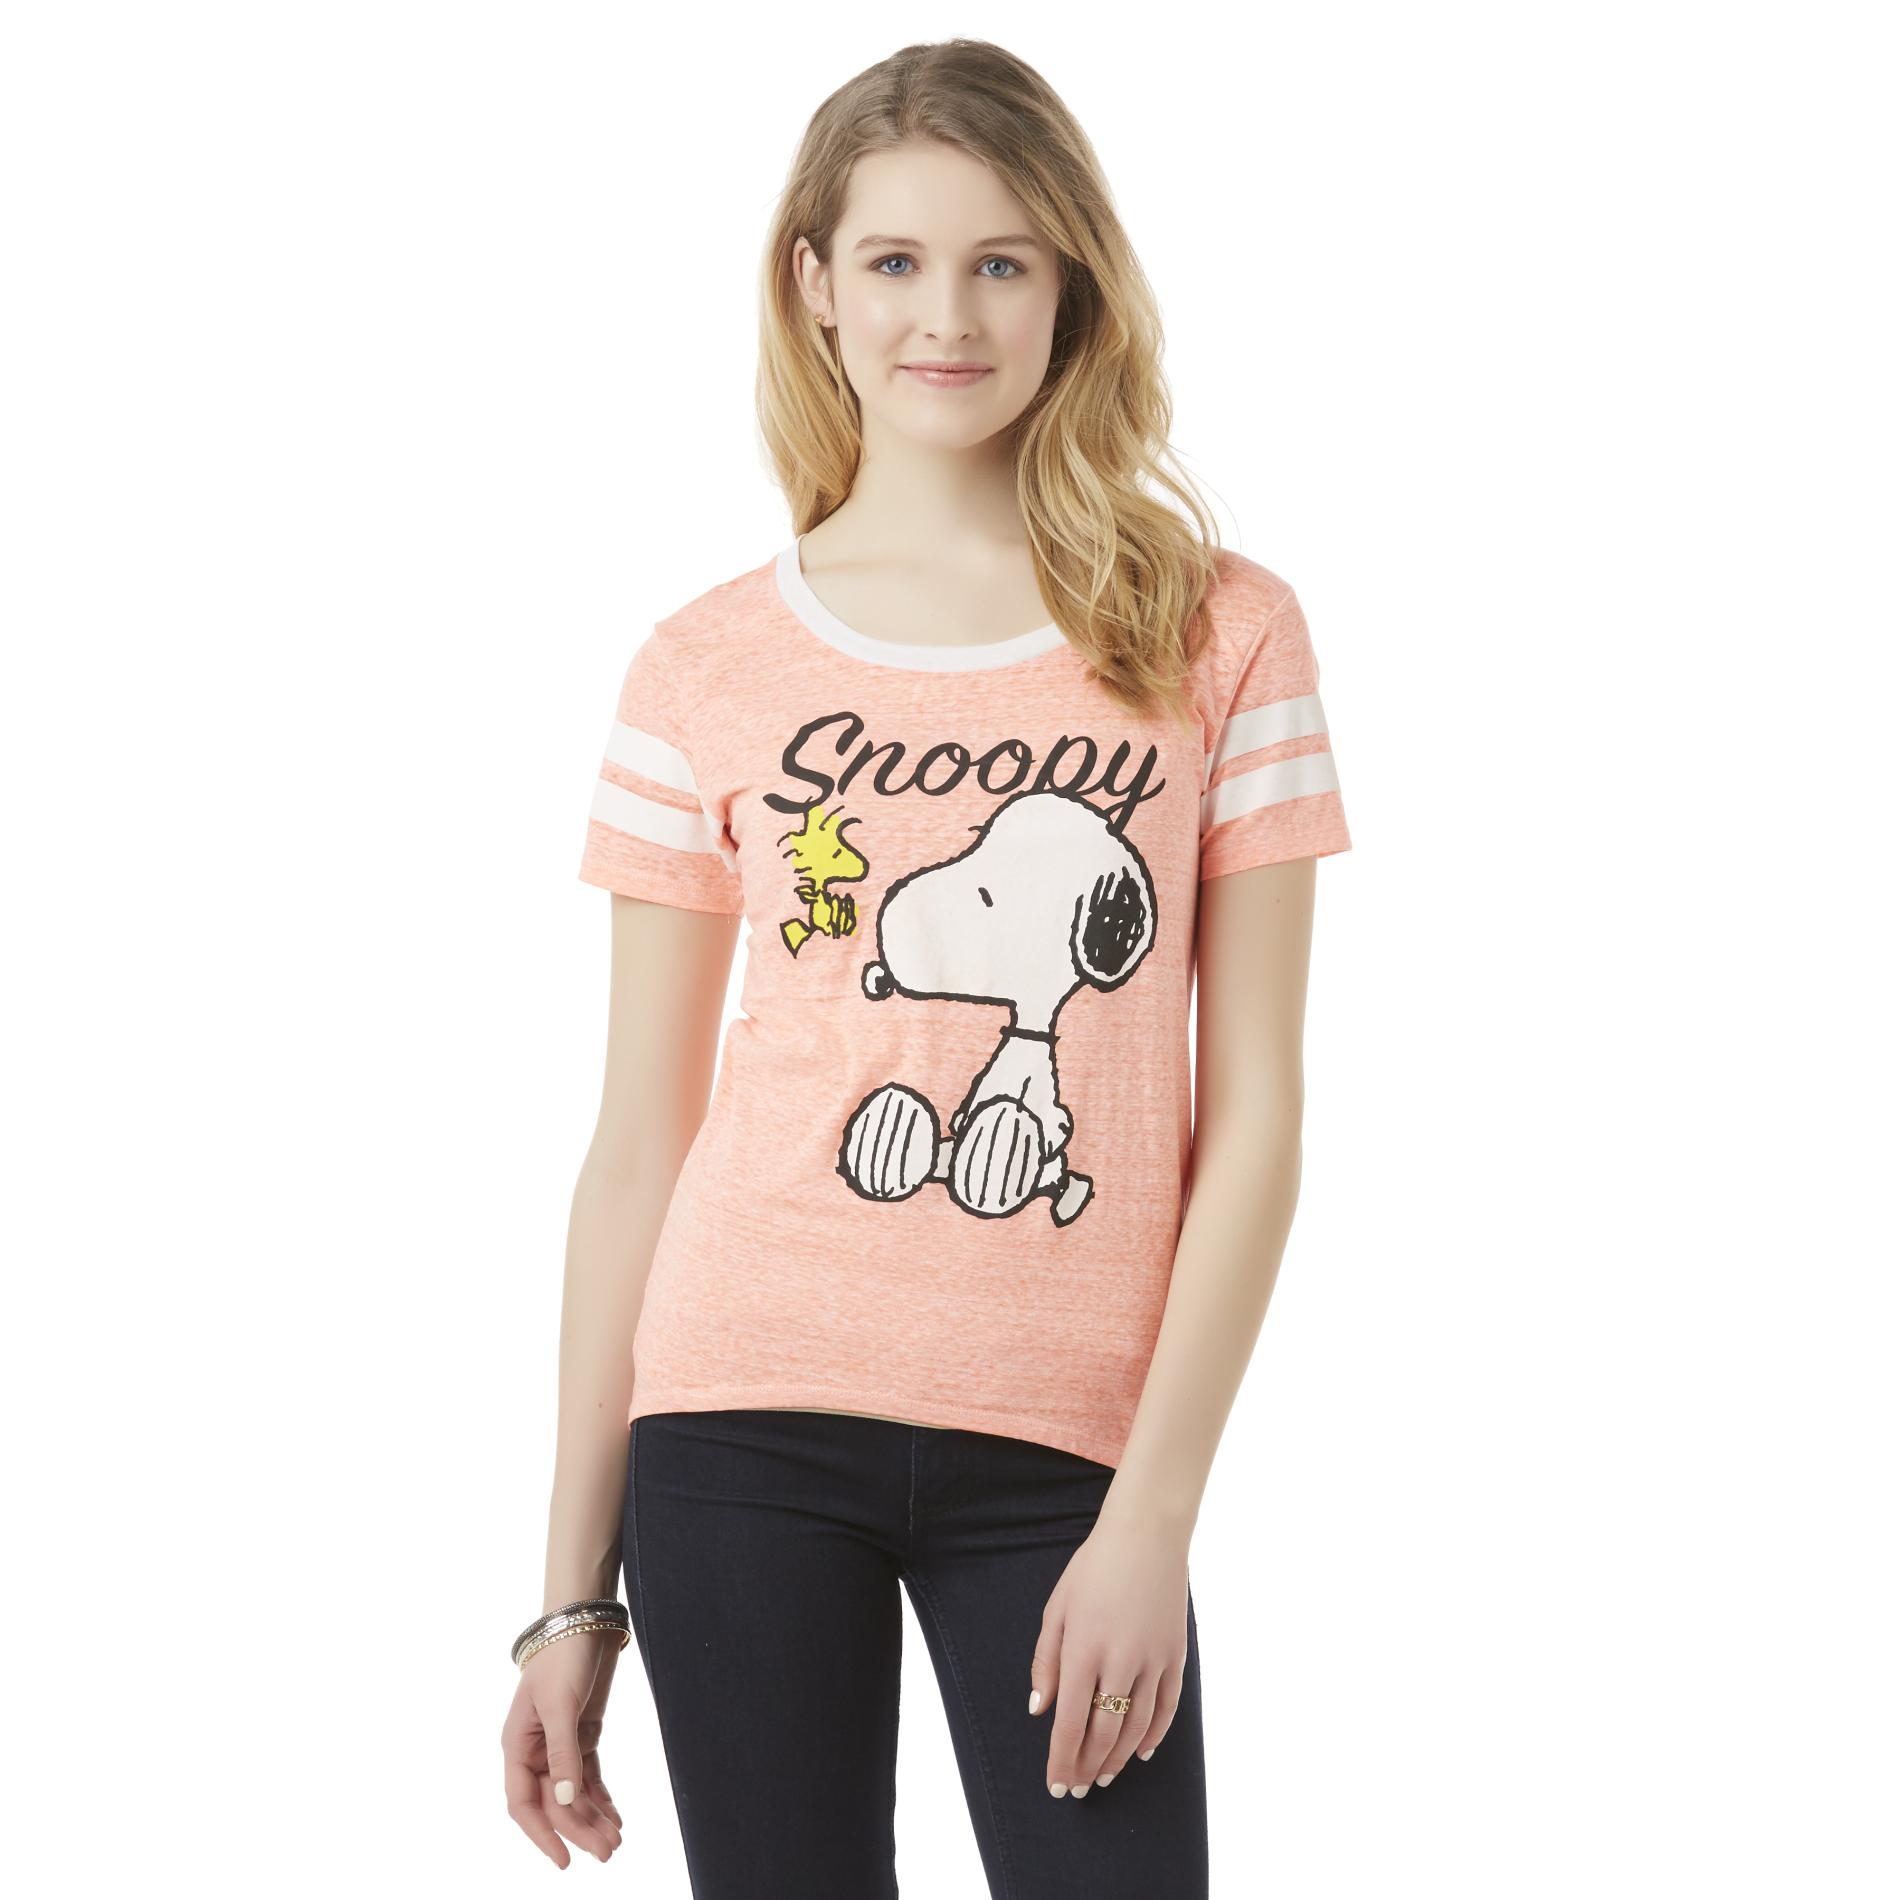 Peanuts By Schulz Junior's T-Shirt - Snoopy & Woodstock